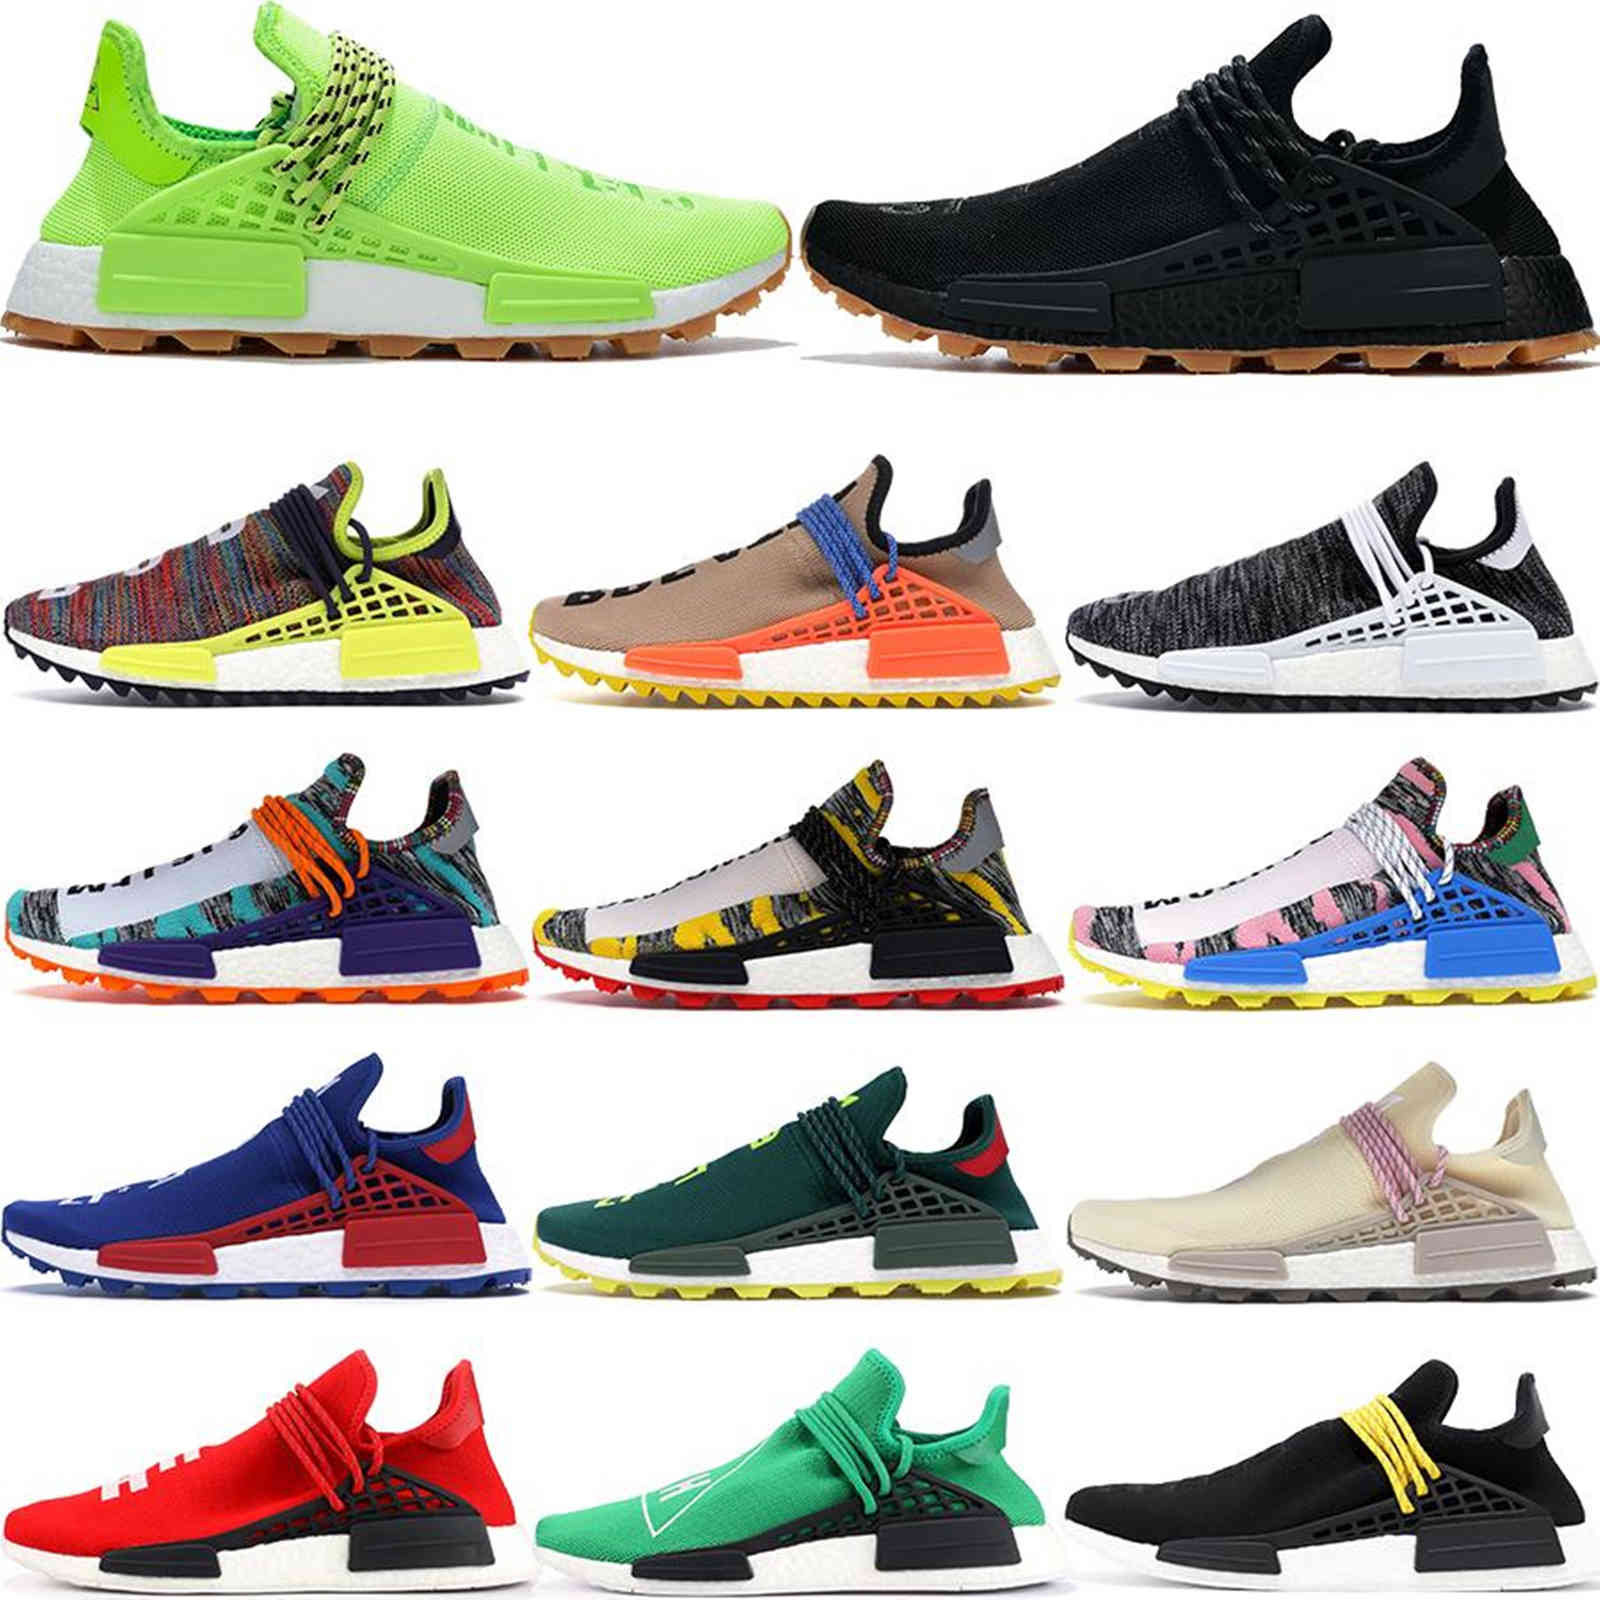 

Nmd Hu Human Race Men Women Running Shoes Pharrell Williams Infinite Species Solar Pack R1 V2 Triple White Orange Blue Mens Sports Sneakers, Real pictures contact us send to you